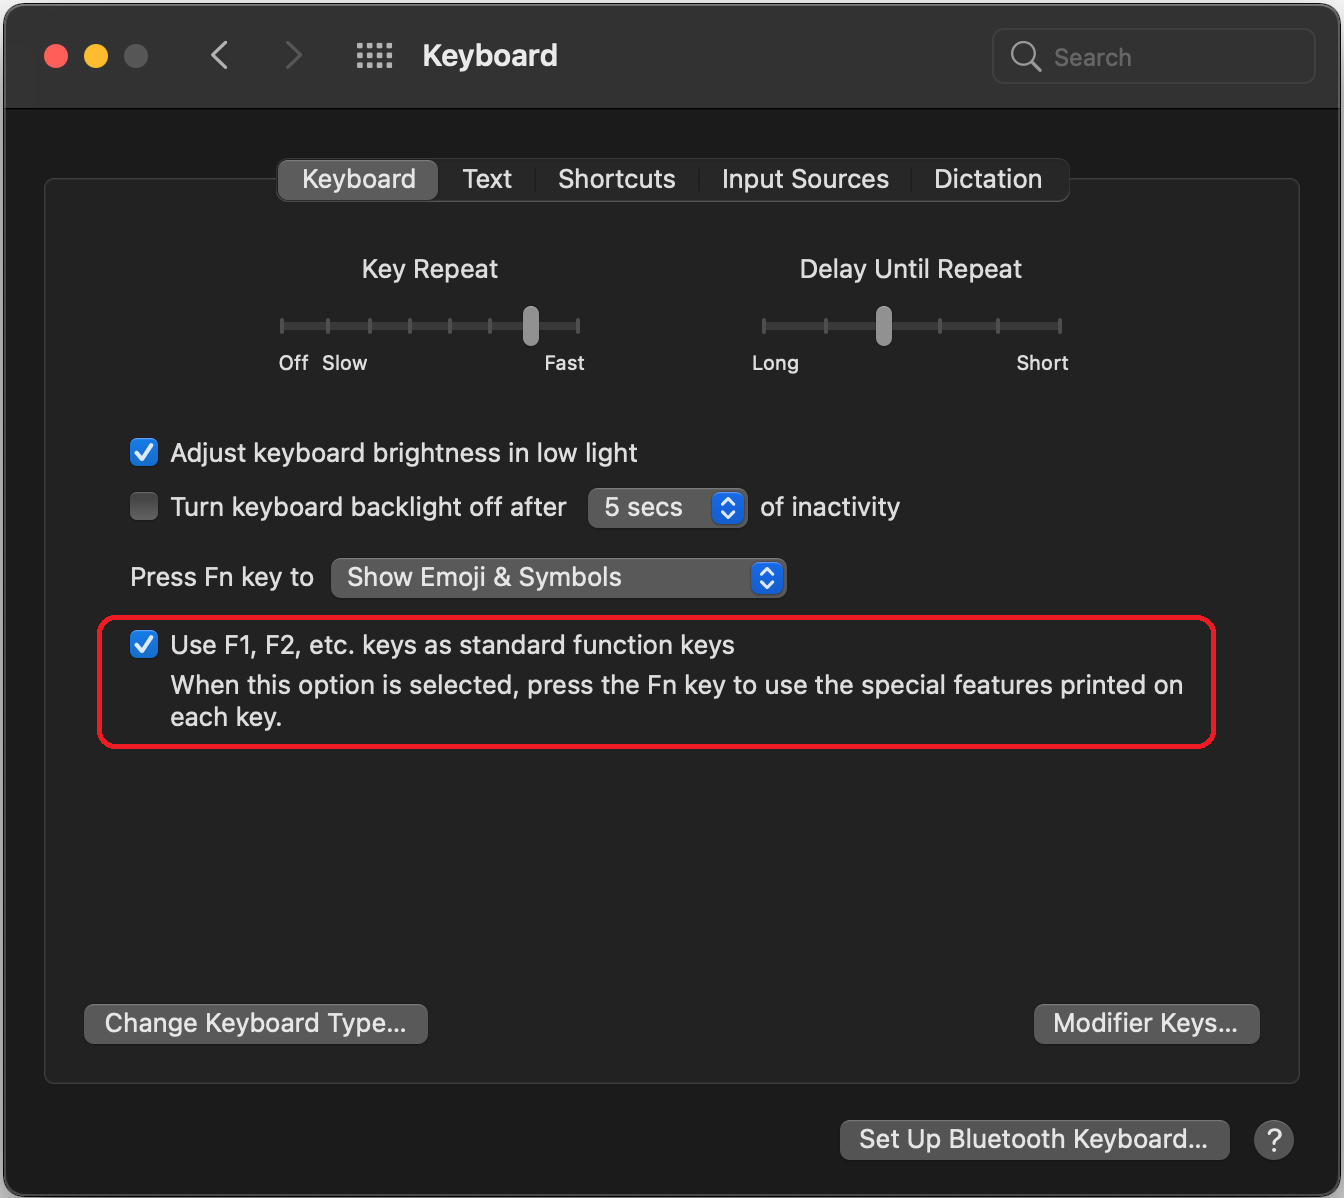 Window showing keyboard preferences options available for MAC users: key repeat, delay until repeat, adjust keyboard brightness in low light, turn keyboard backlight off after xx sec of inactivity, press Fn key to (choose from dropdown) and use F1, F2, etc. keys as standard function keys.